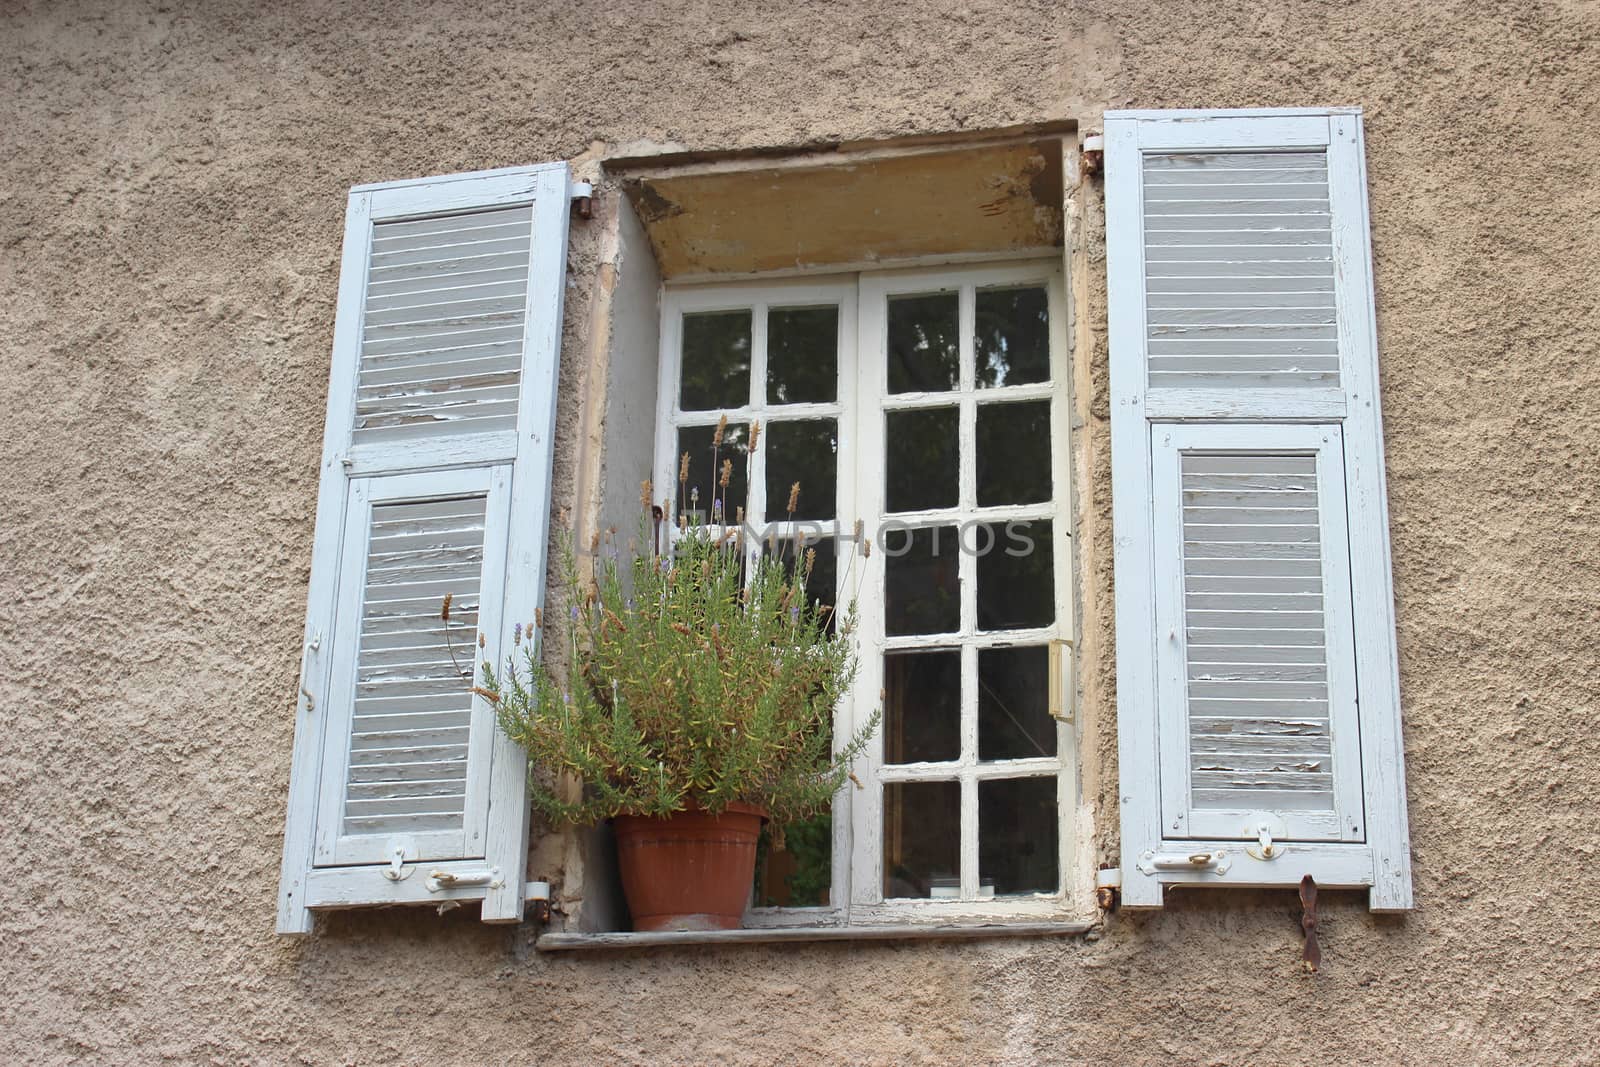 Rustic window and Lavender in the village of Eze, France